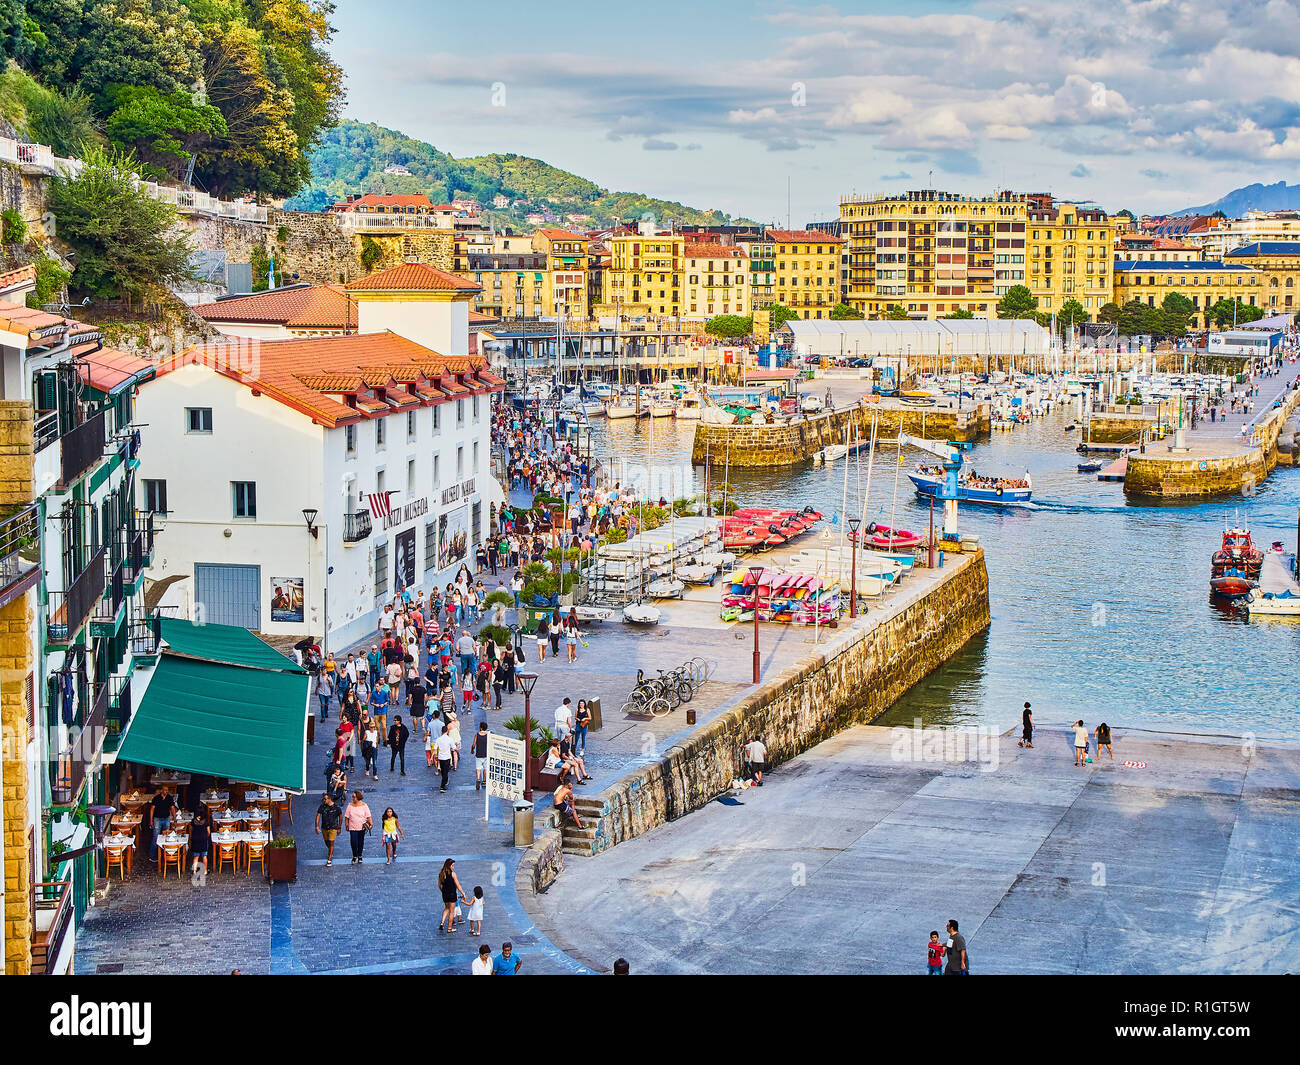 The port of San Sebastian with the Historical Quarter, kwon as Parte Vieja, in the background at sunny day. Donostia, Basque Country, Guipuzcoa. Spain. Stock Photo